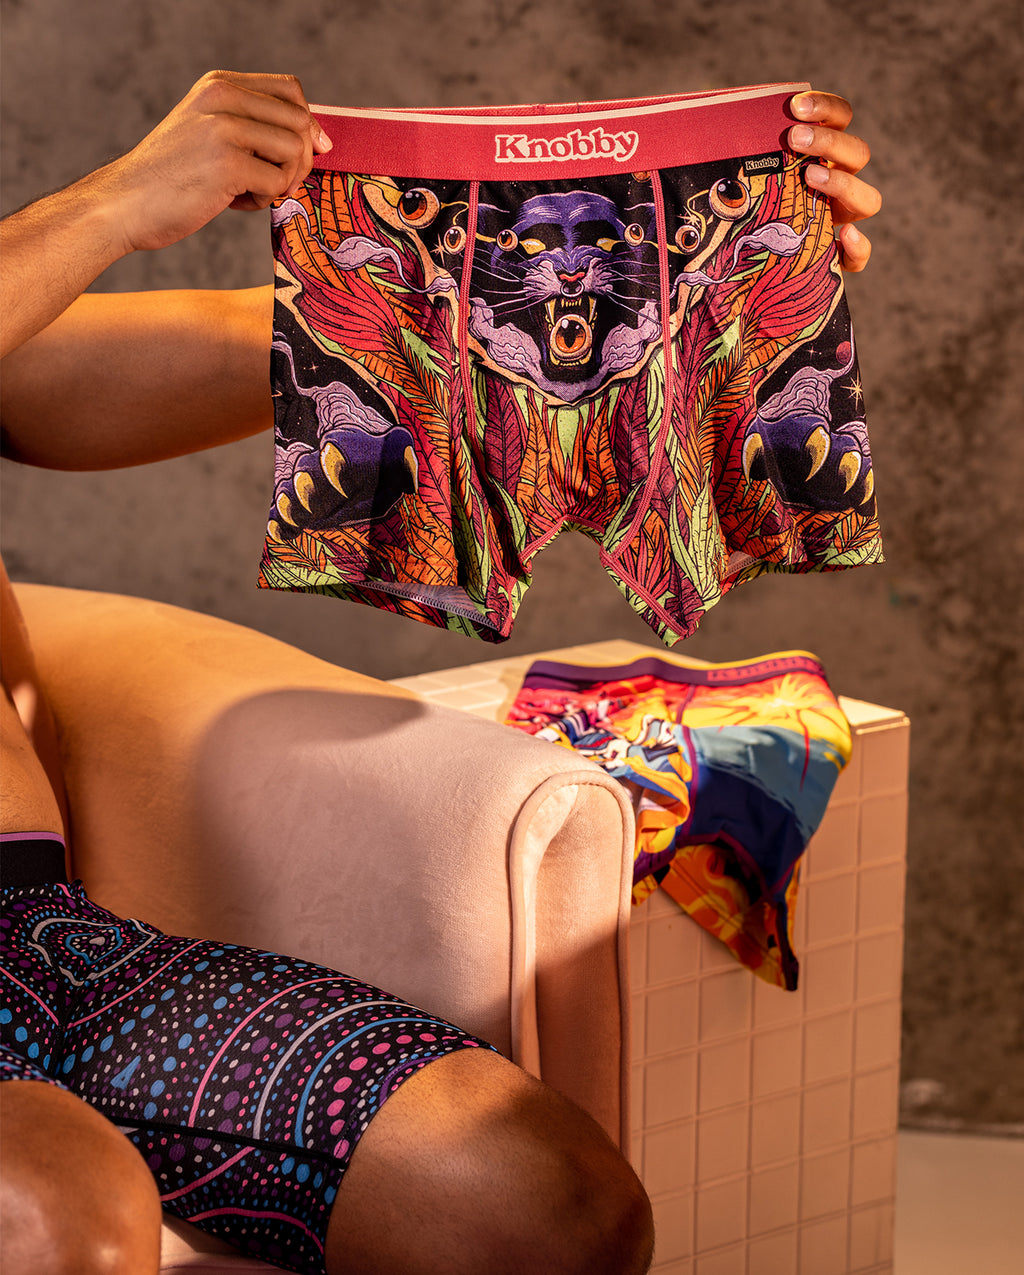 Knobby - Introducing the most native edition yet right in time for swoopy  season! www.knobby.com.au/collections/swoopy-underwear